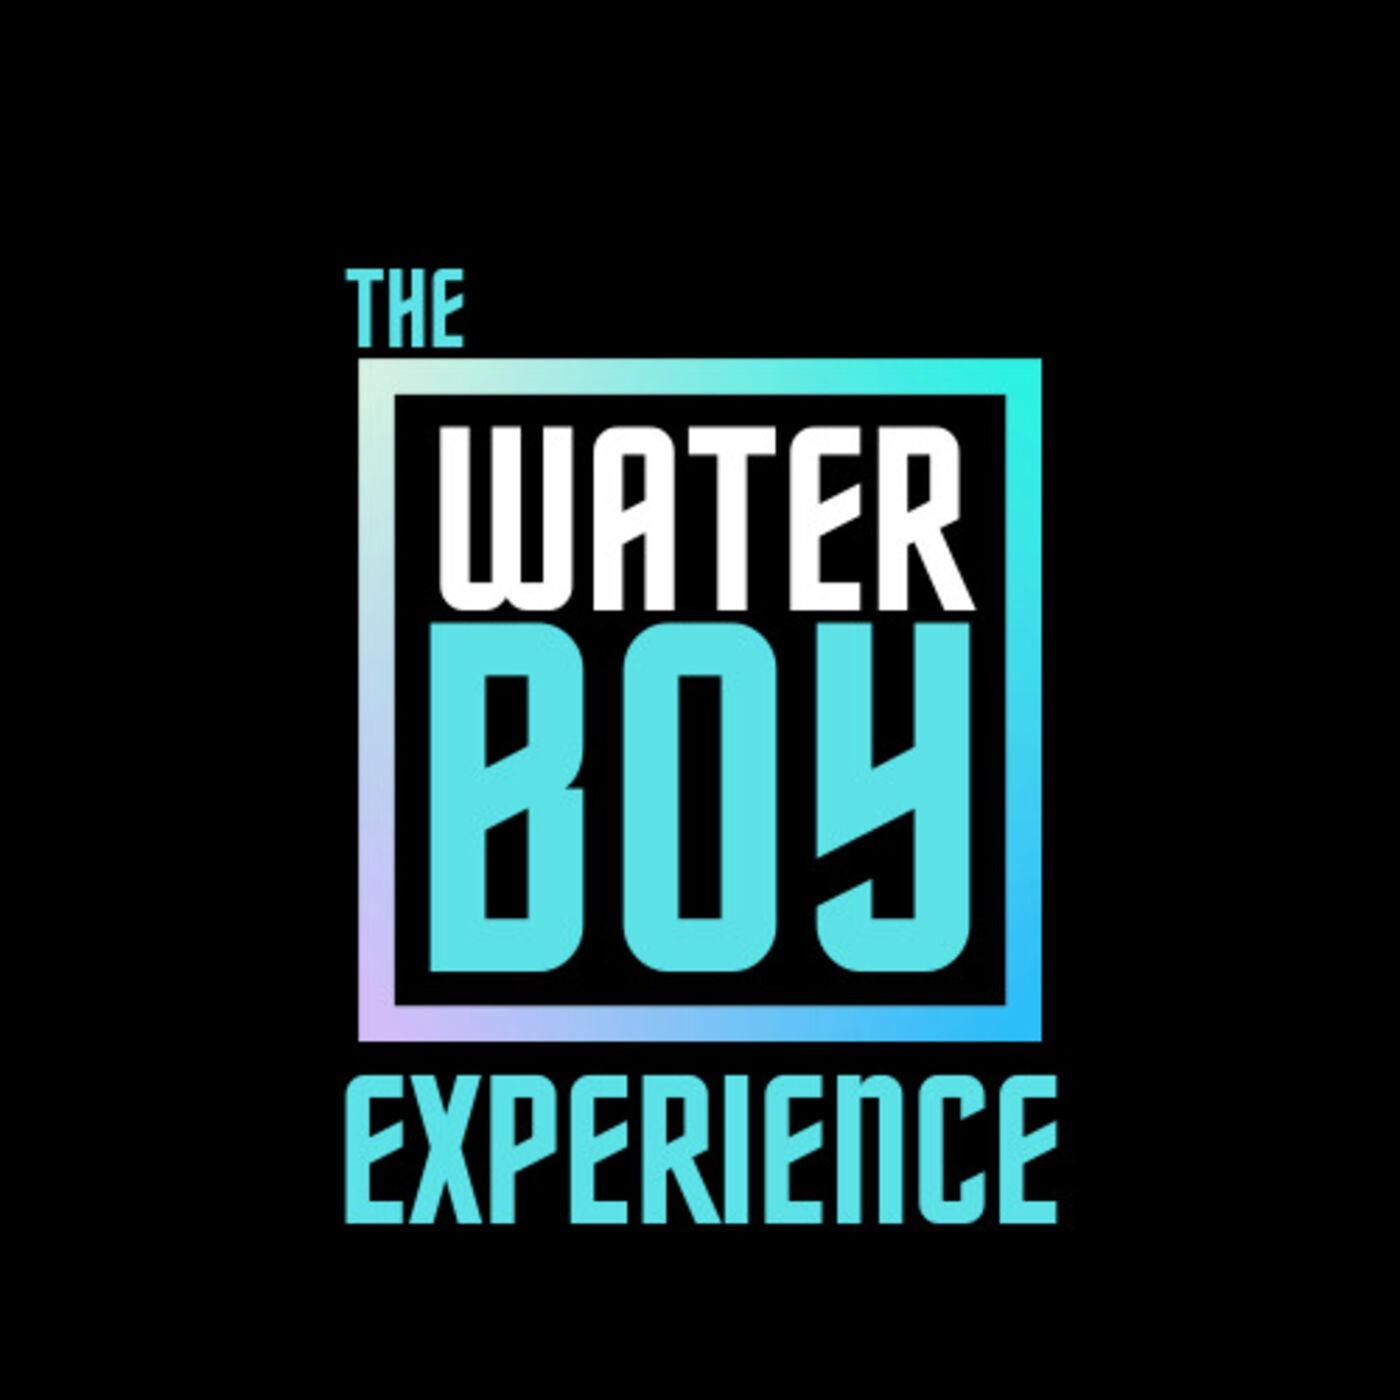 The Waterboy Experience